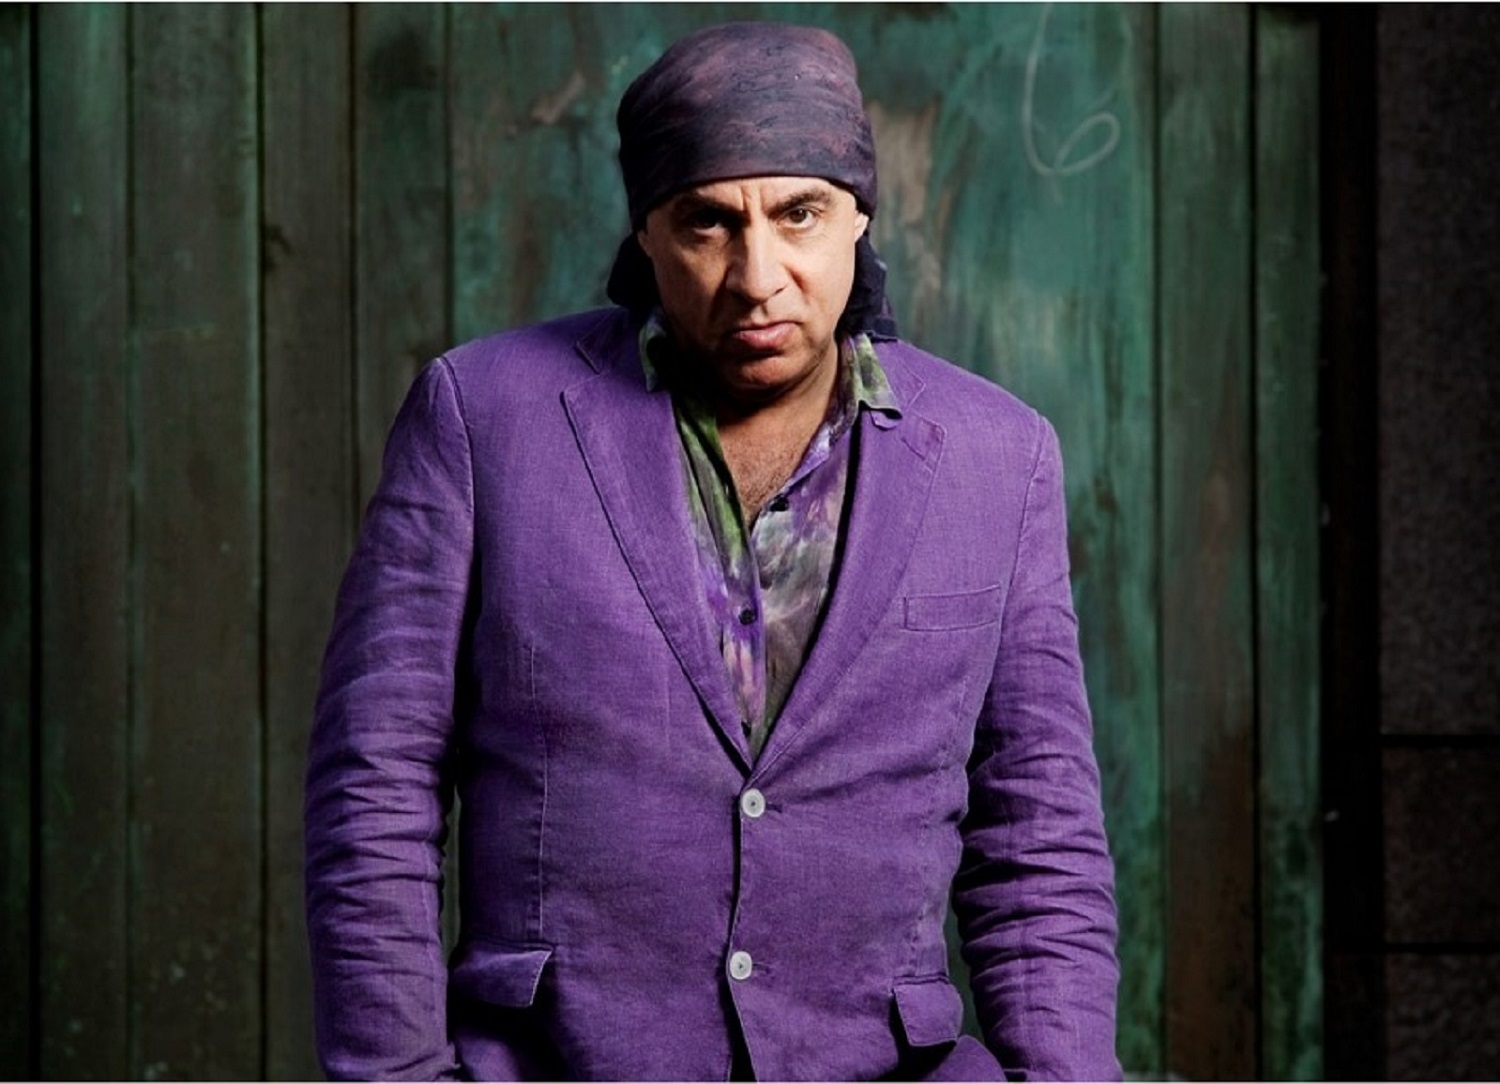 Steve Van Zandt on how tomorrow can be better, actually